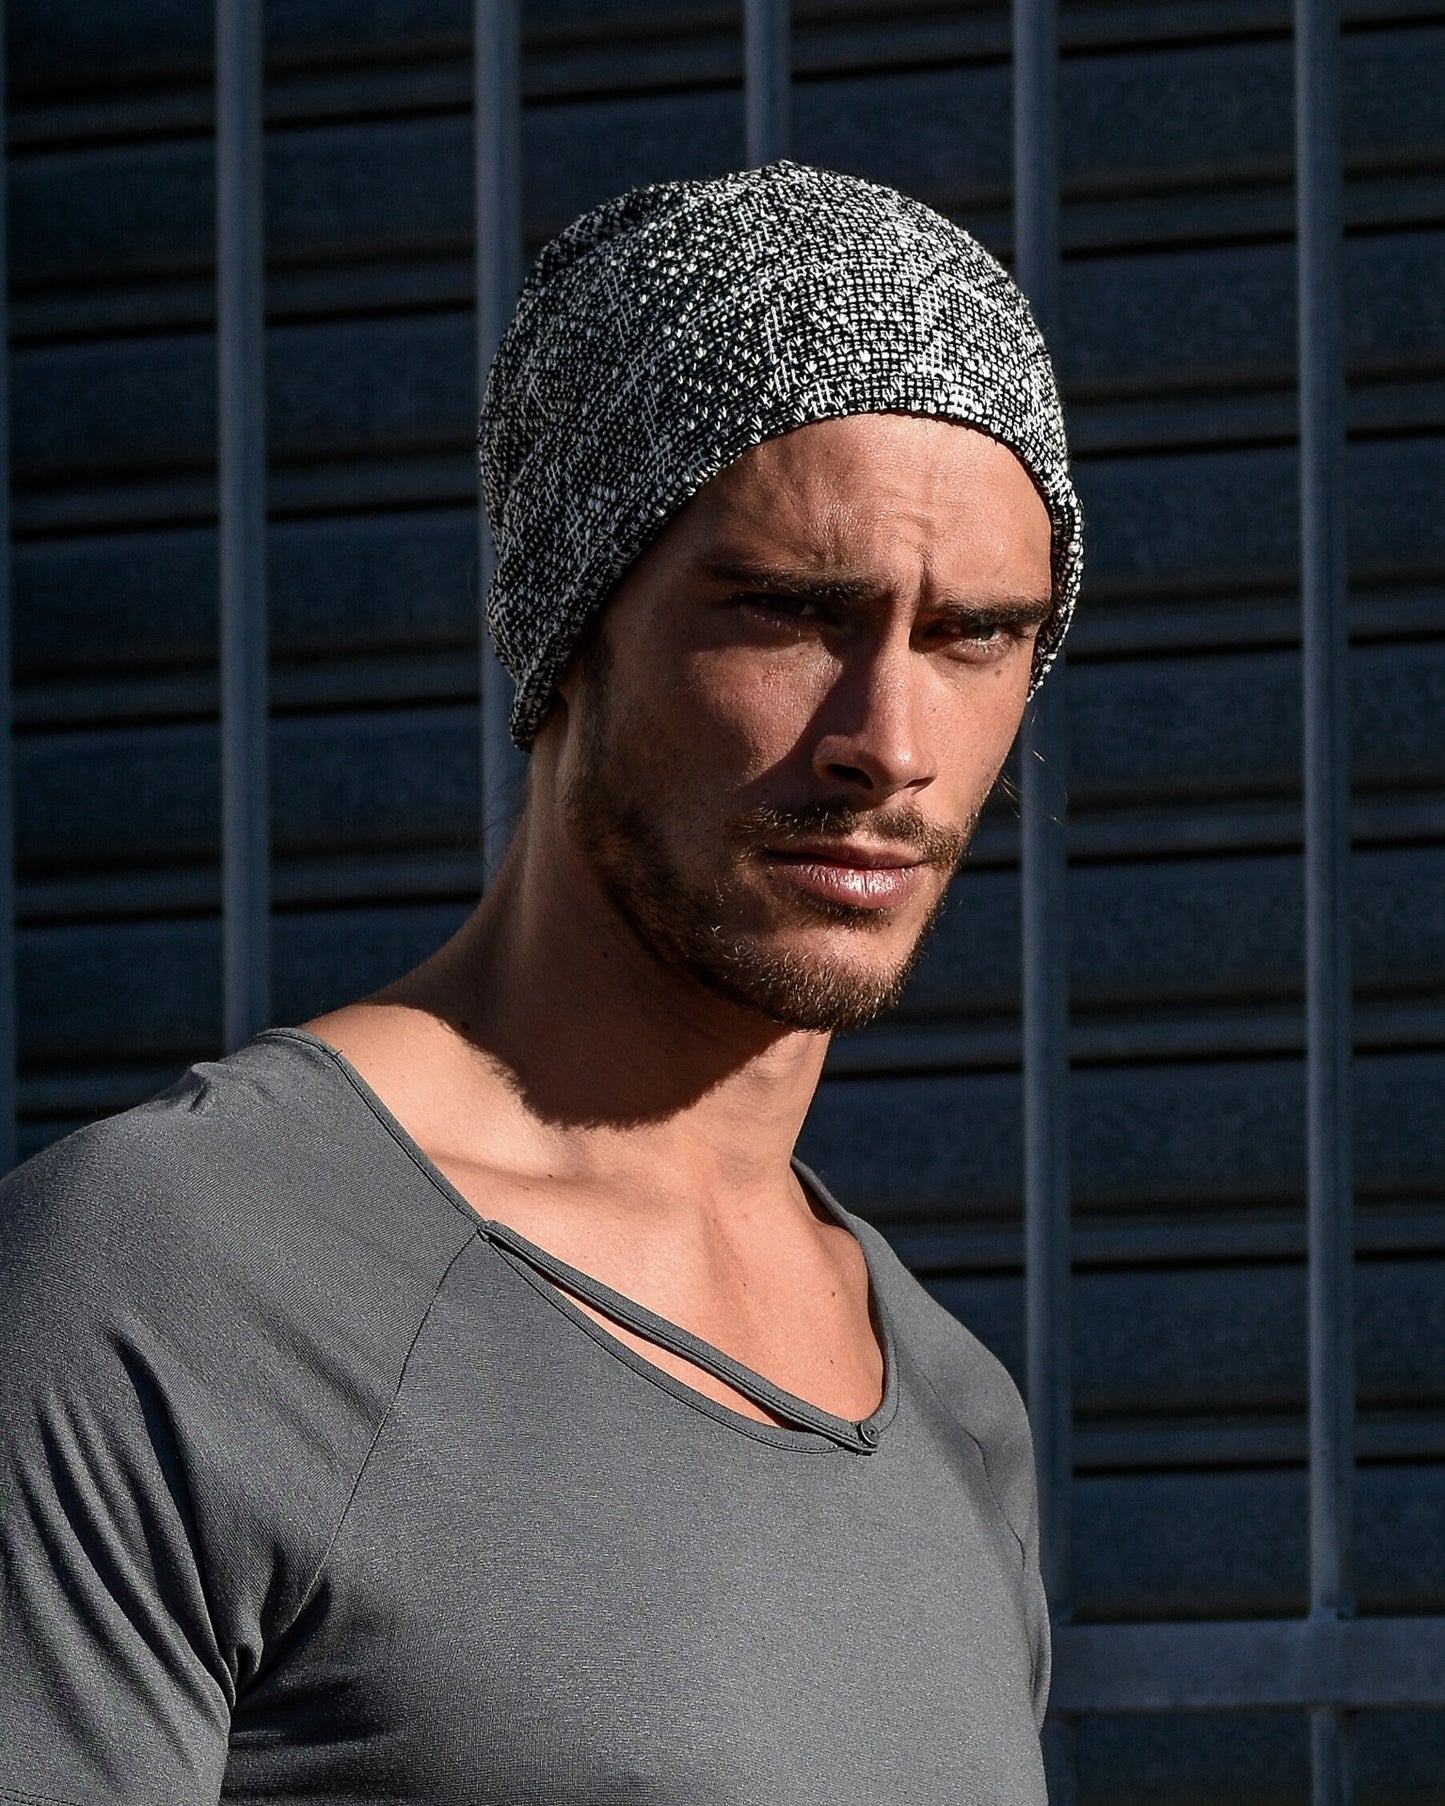 2-in-1 Boucle Beanie and Snood/Buff ZG5273